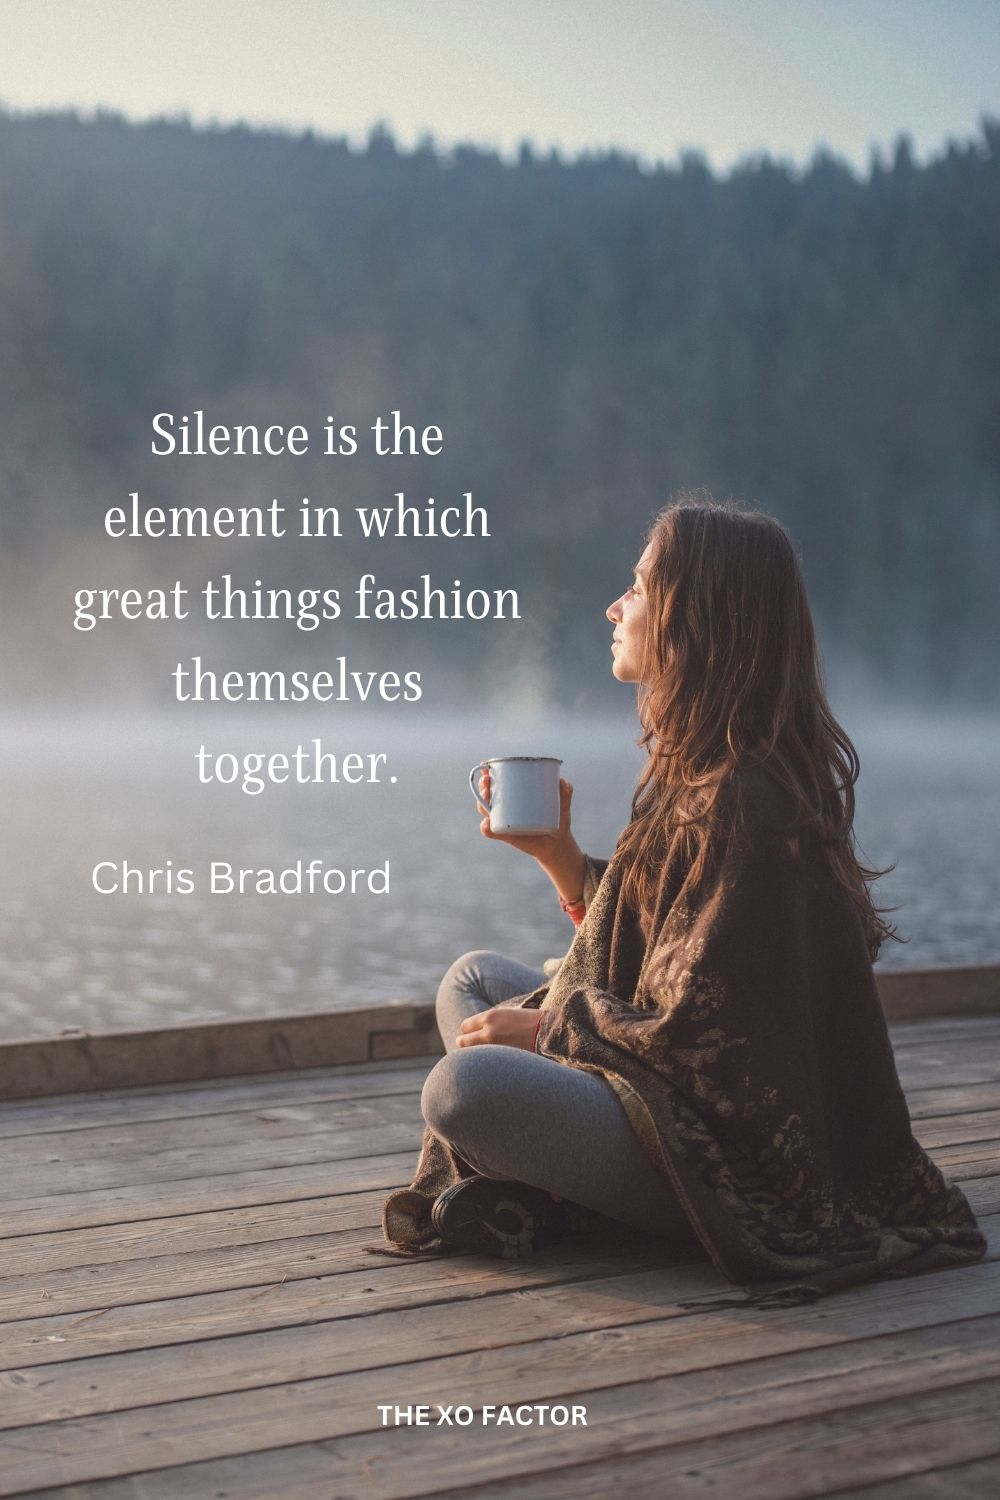 Silence is the element in which great things fashion themselves together.
Chris Bradford